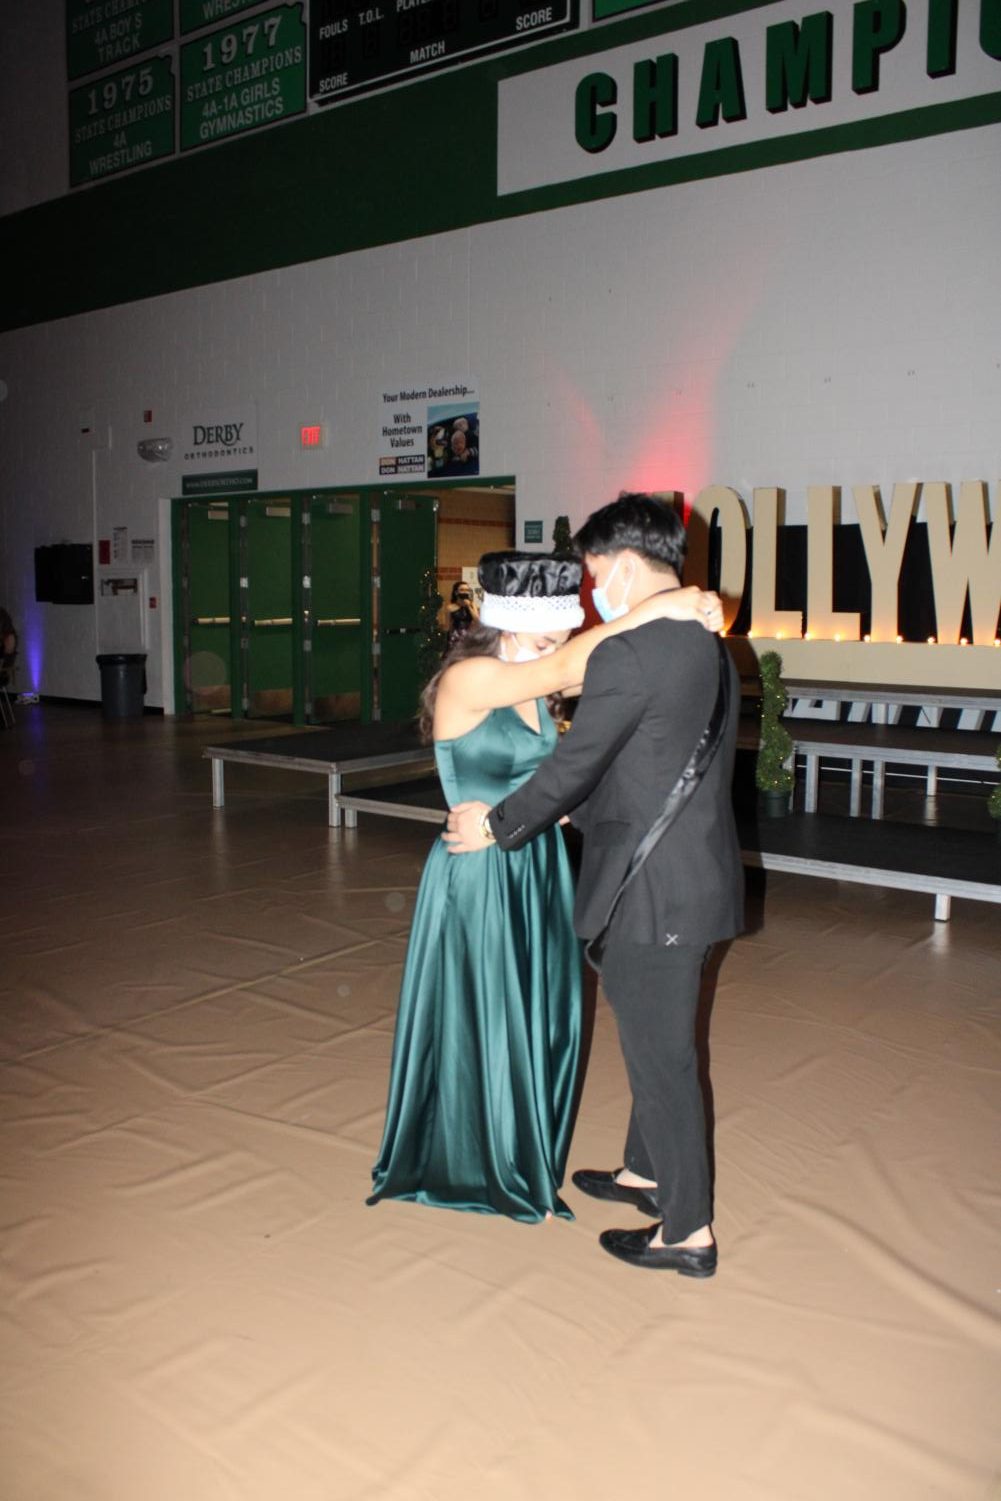 Prom+2021+%28Photos+by+Joselyn+Steele%29